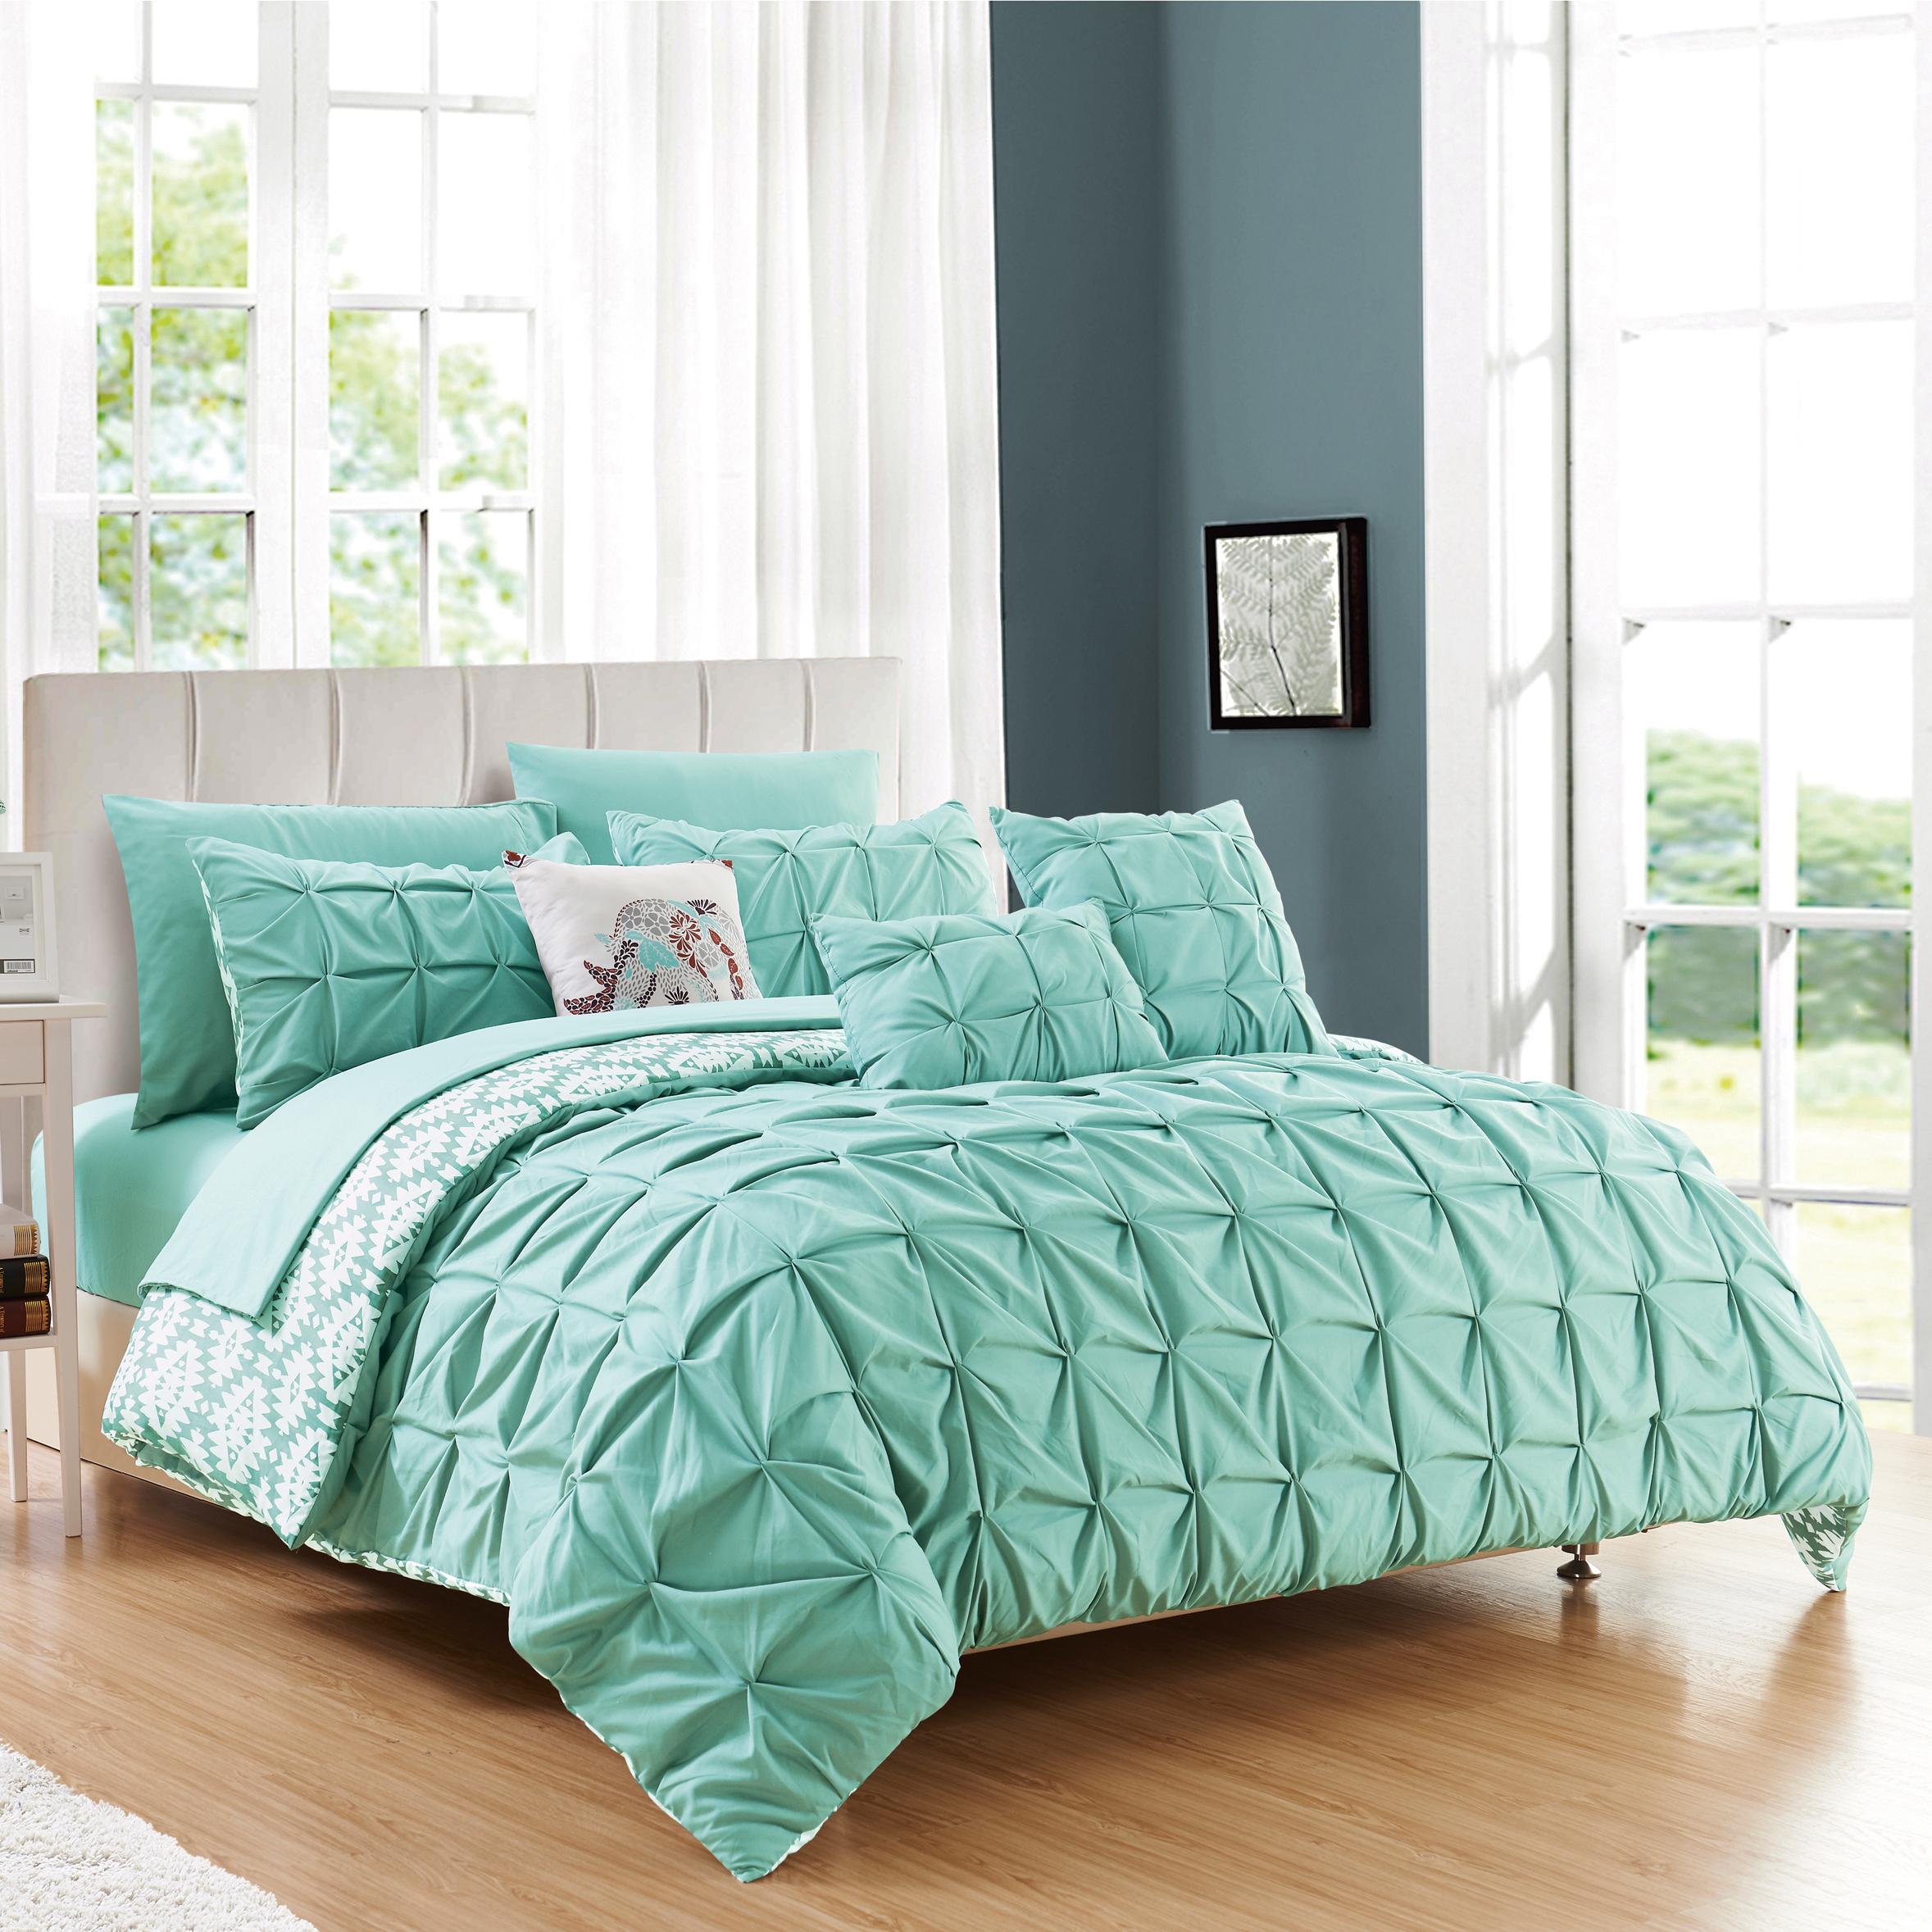 Rahab 10 Or 8 Piece Reversible Comforter Set Complete Bed In A Bag Pintuck Pleated And Aztec Inspired - Aqua, King